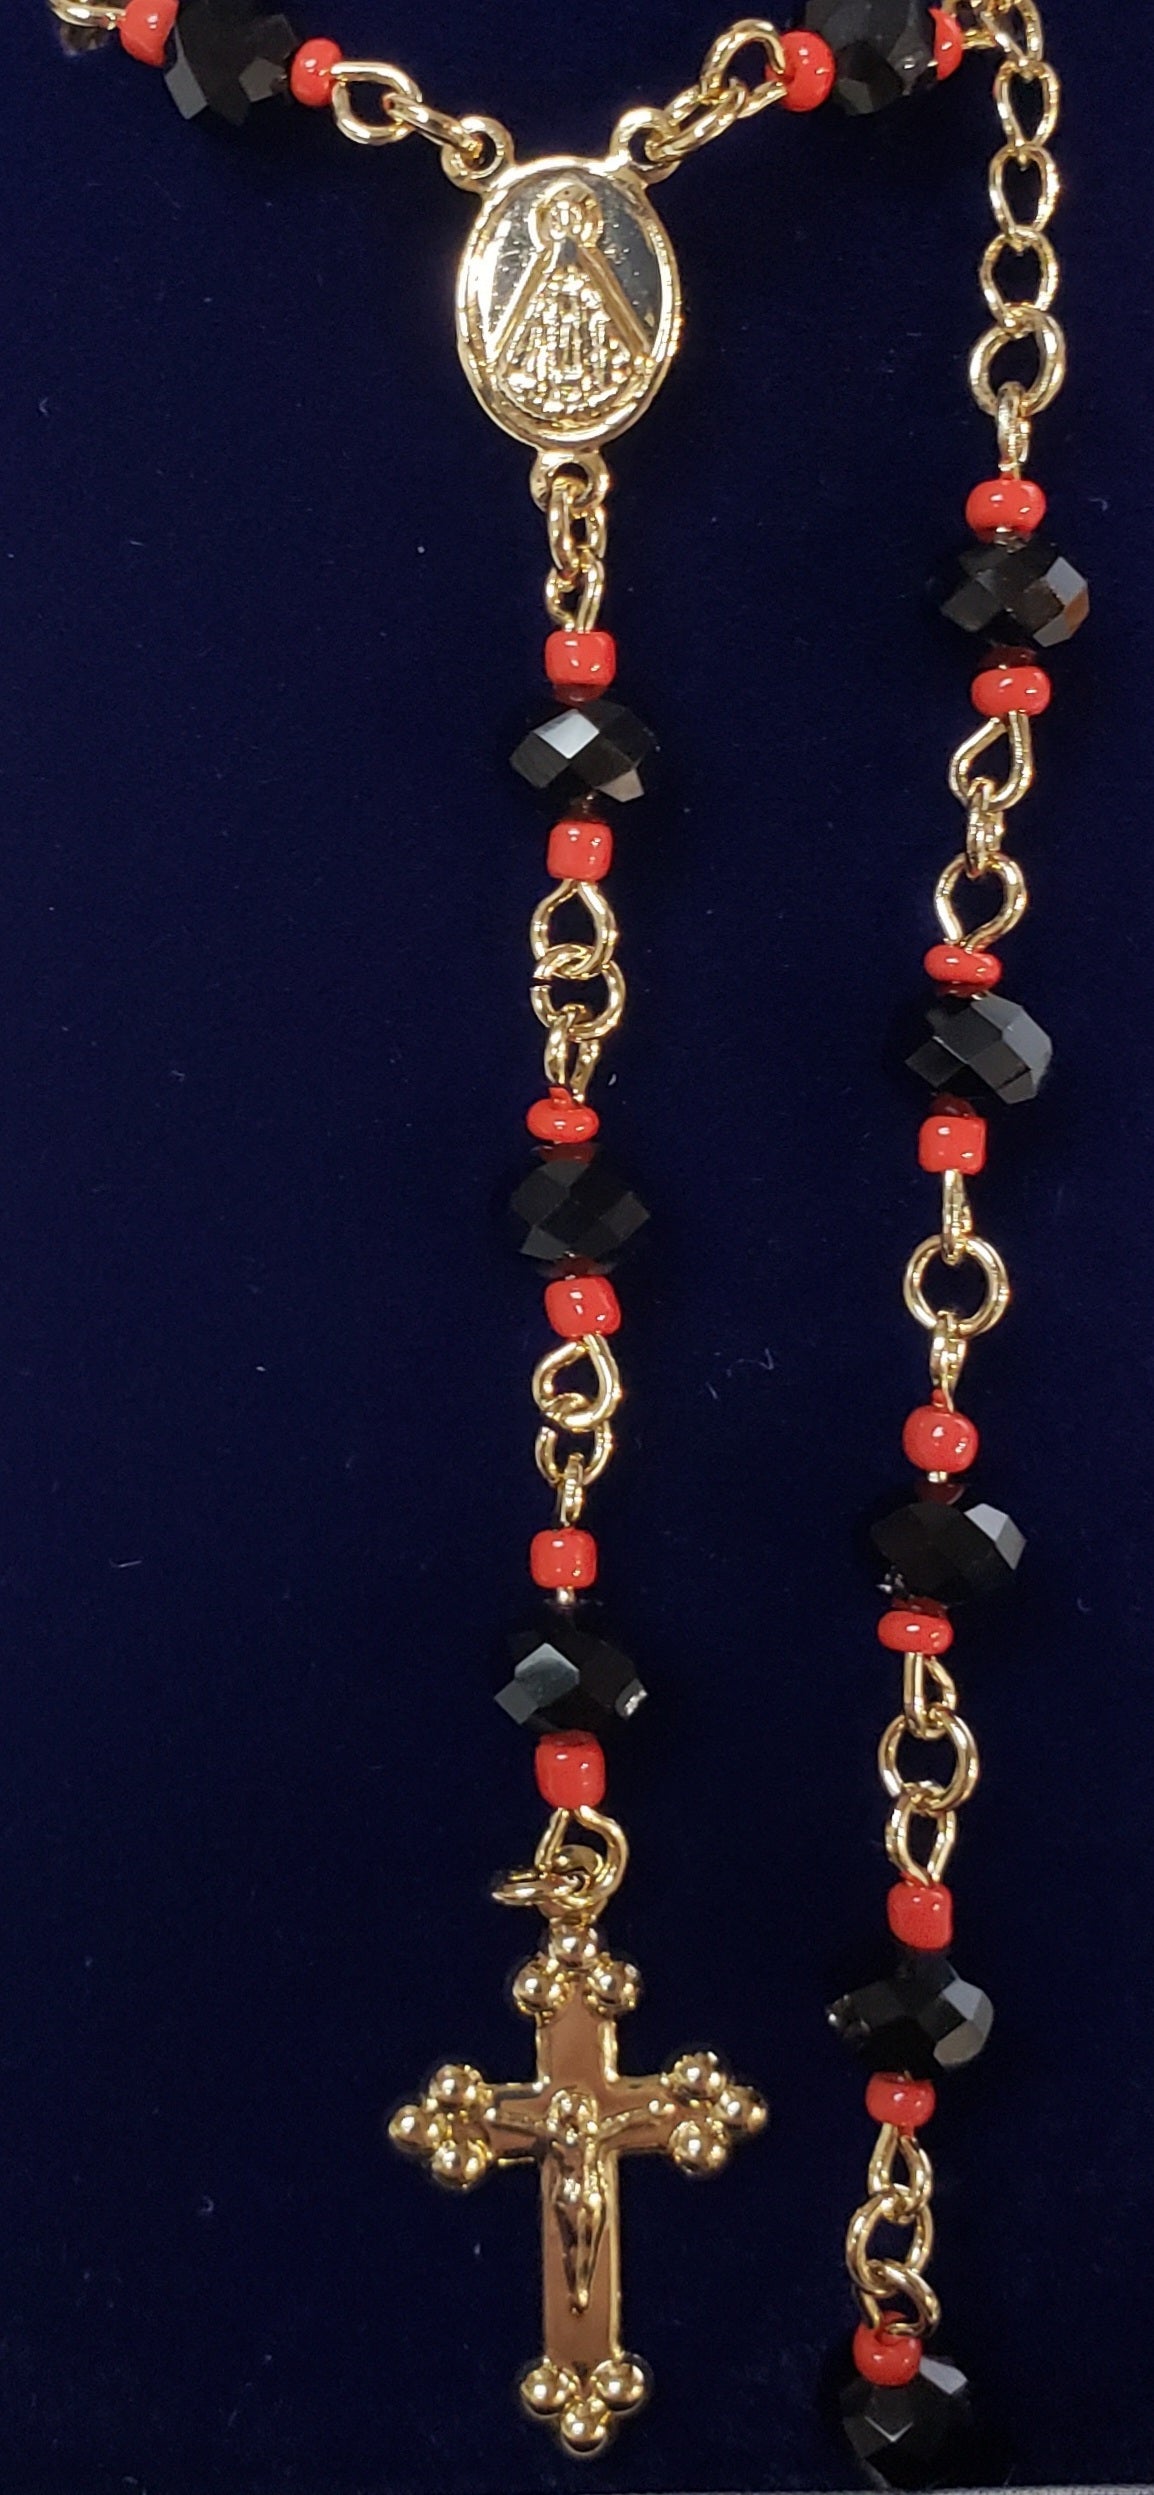 Black and Small Red Beads Rosary necklace with Virgin Mary medal